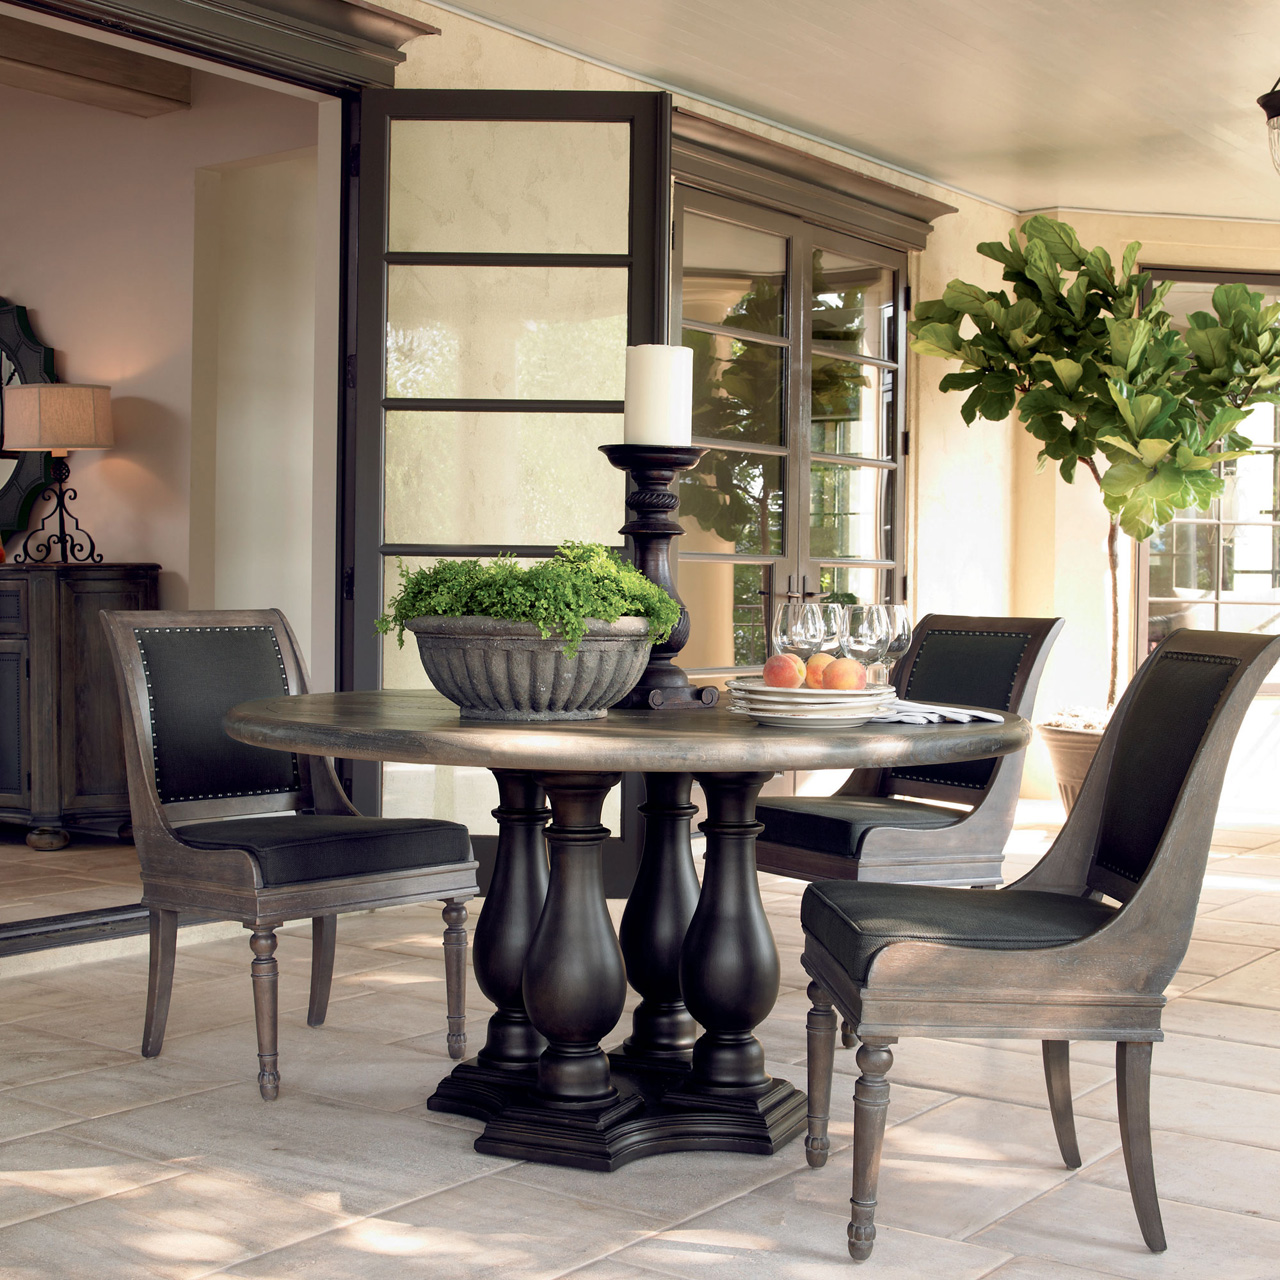 Creatice Furniture Dining Room for Large Space